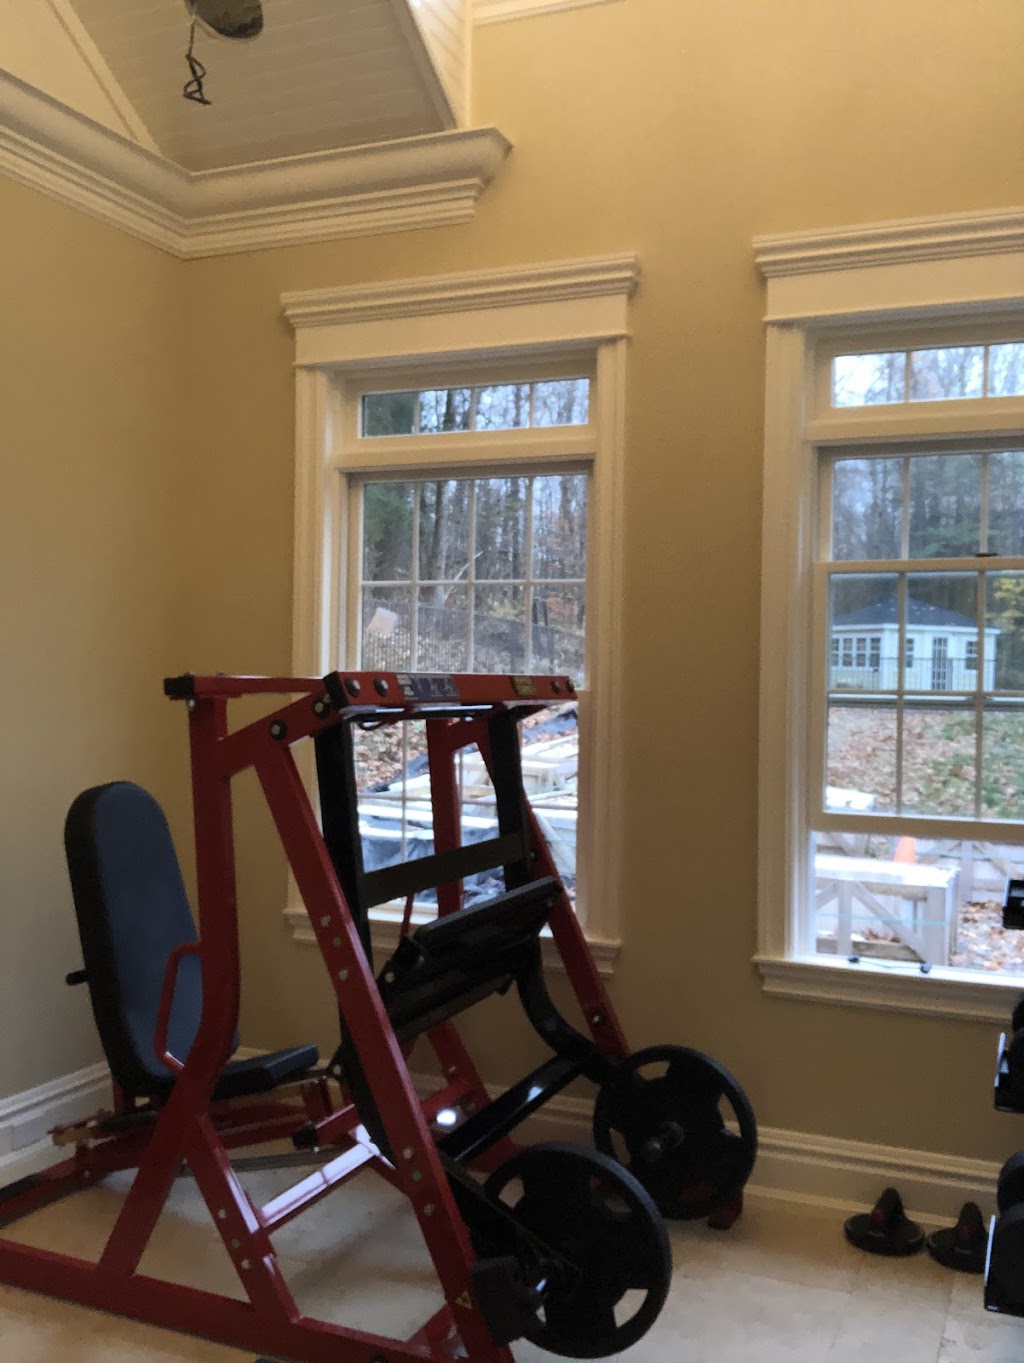 Elite FTS Fitness Private Gym | 172 Knollwood Rd, Rhinebeck, NY 12572 | Phone: (845) 750-0082